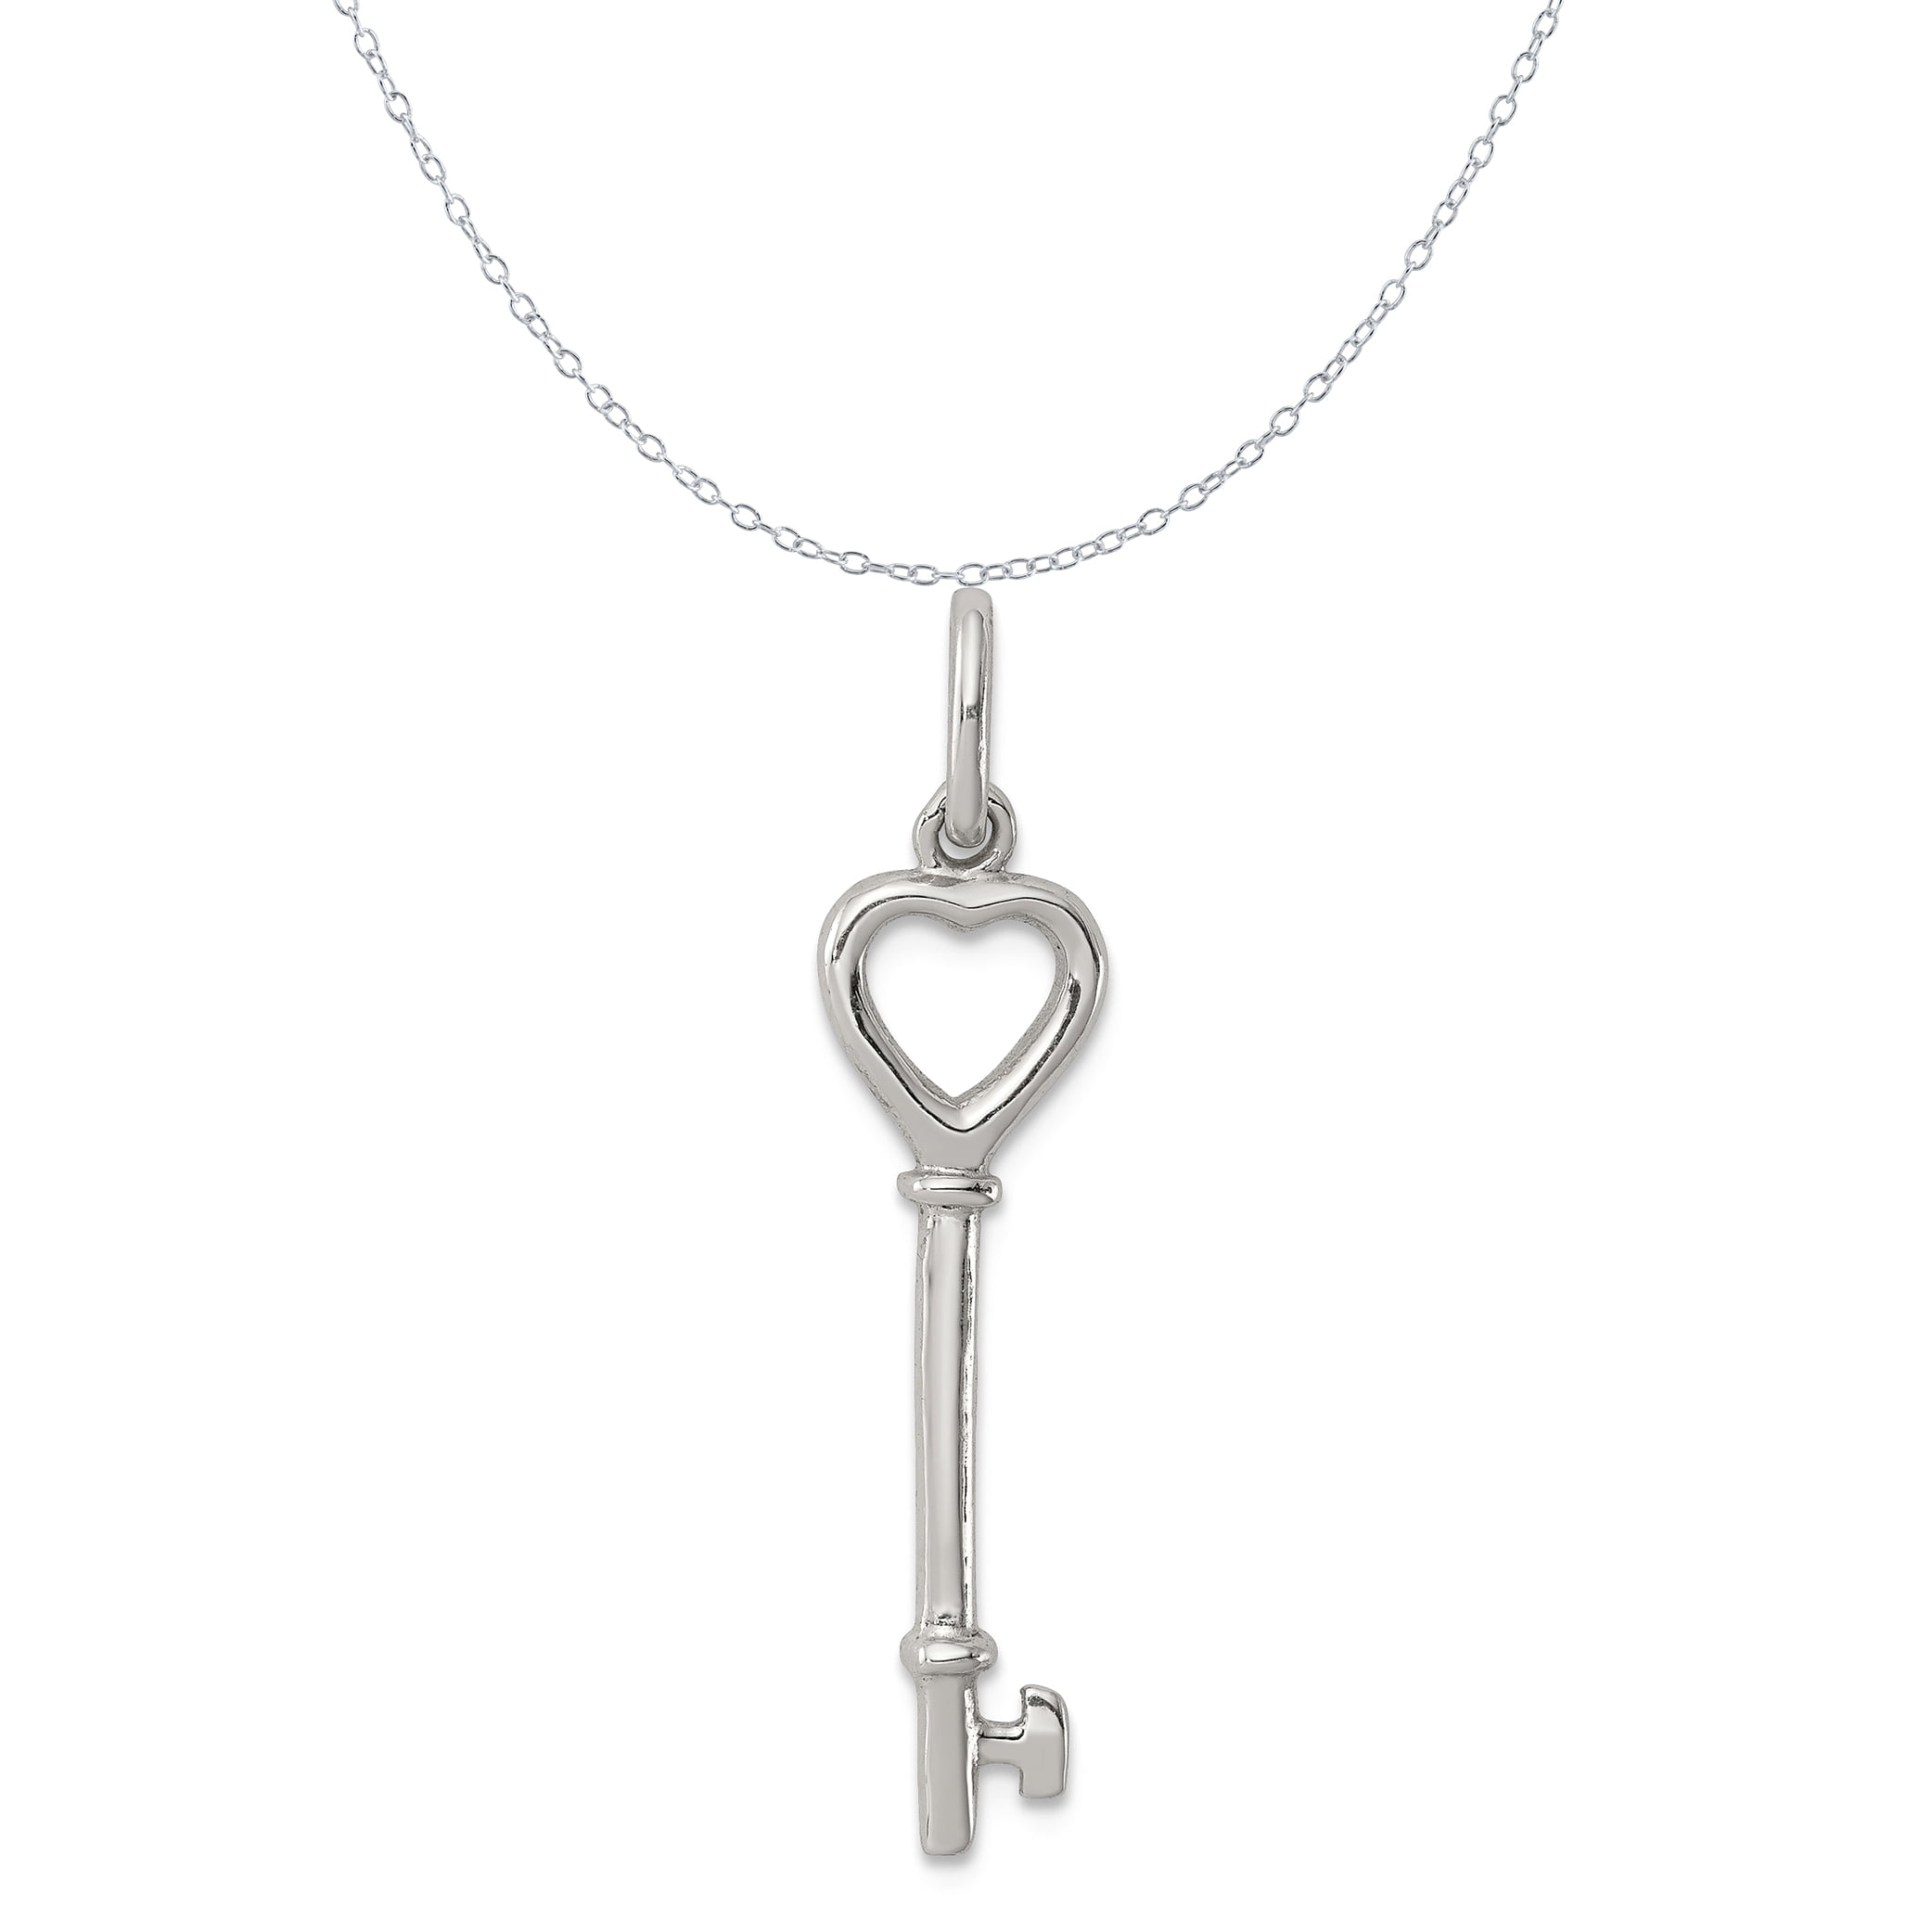 Silver Lock and Key Pendant Key To My Heart Necklace Free Shipping Handmade with All Sterling Silver